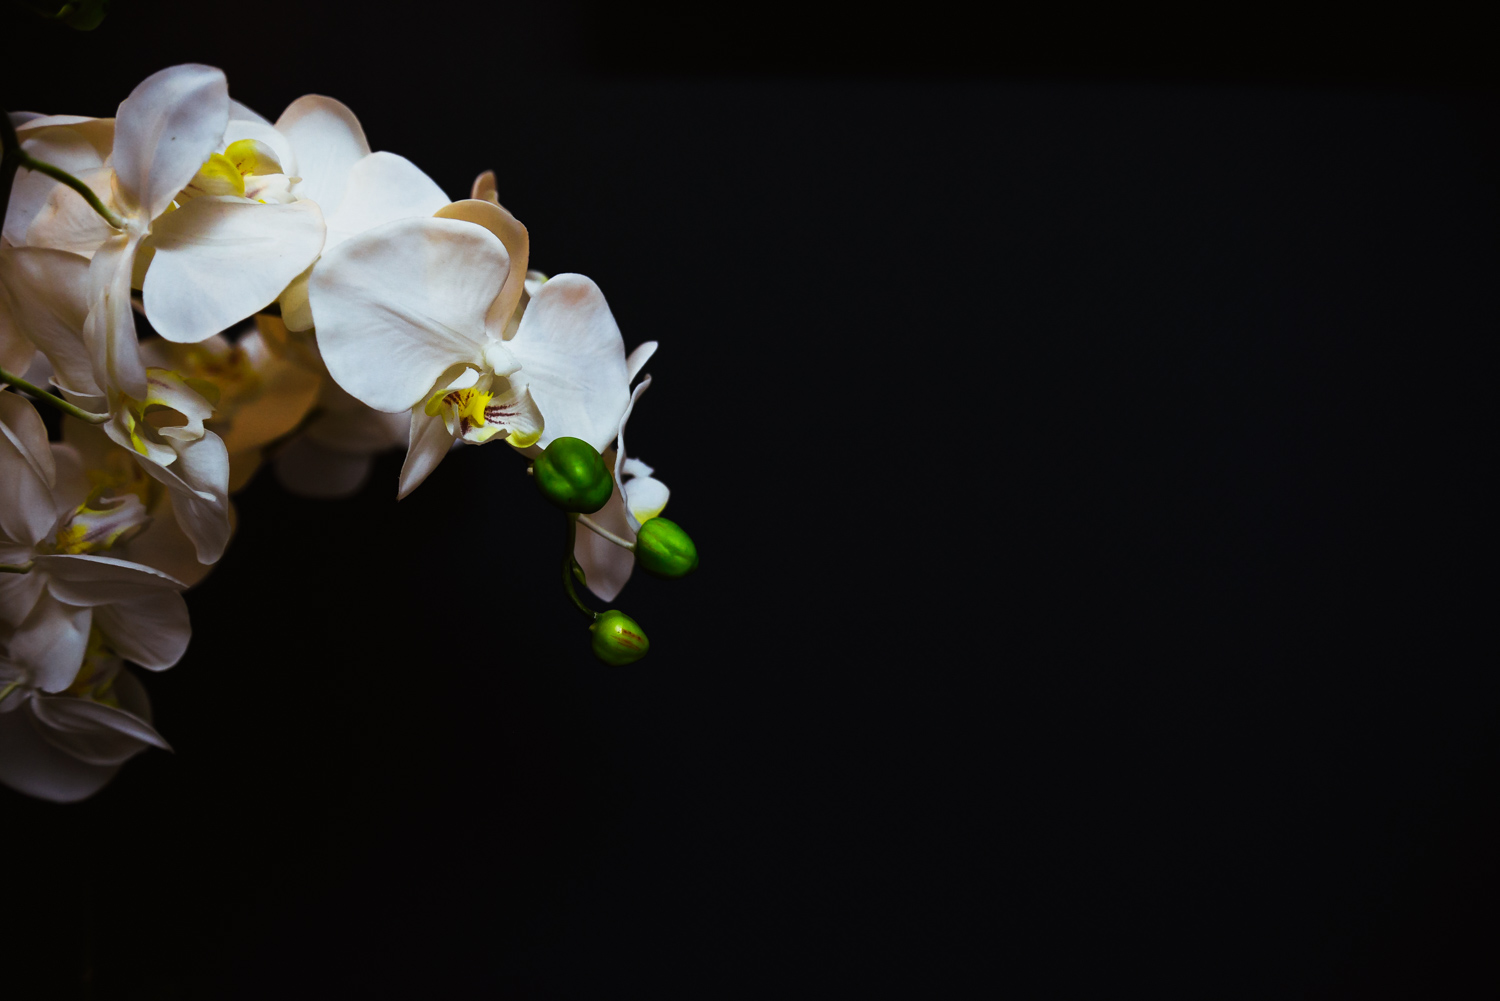 Orchid against black background